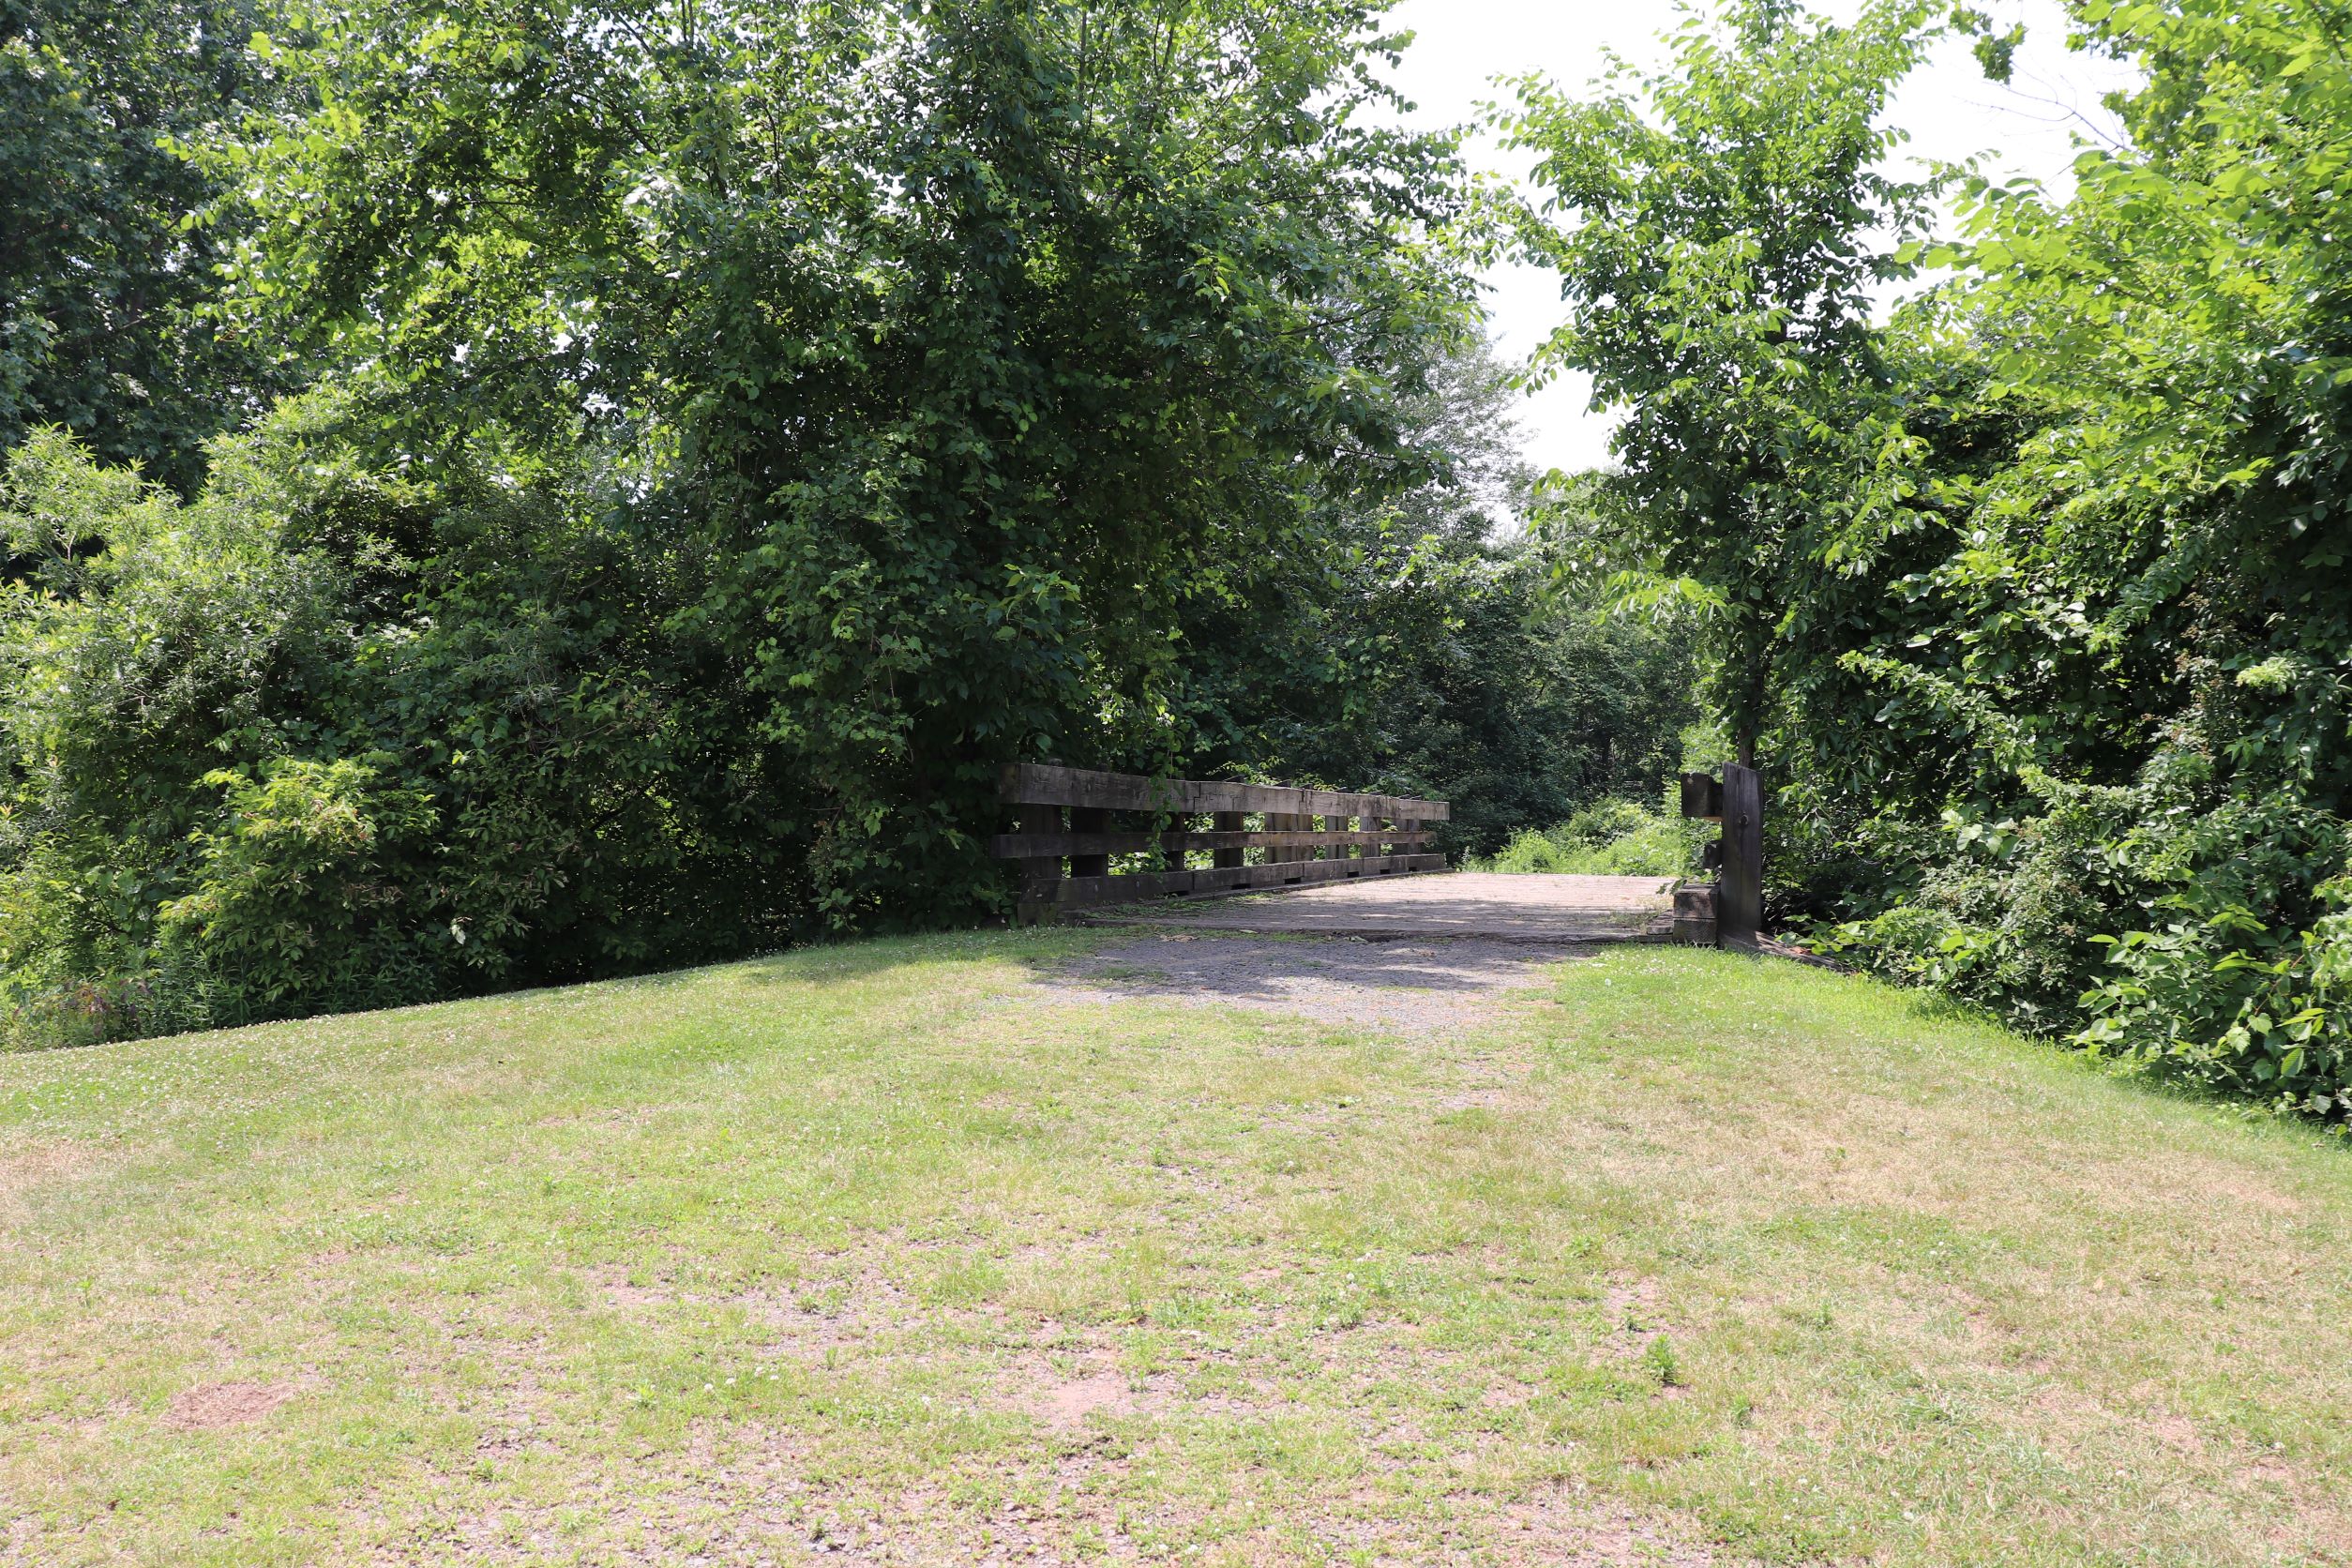 image of bridge over brook at wadsworth state park in middletown ct.